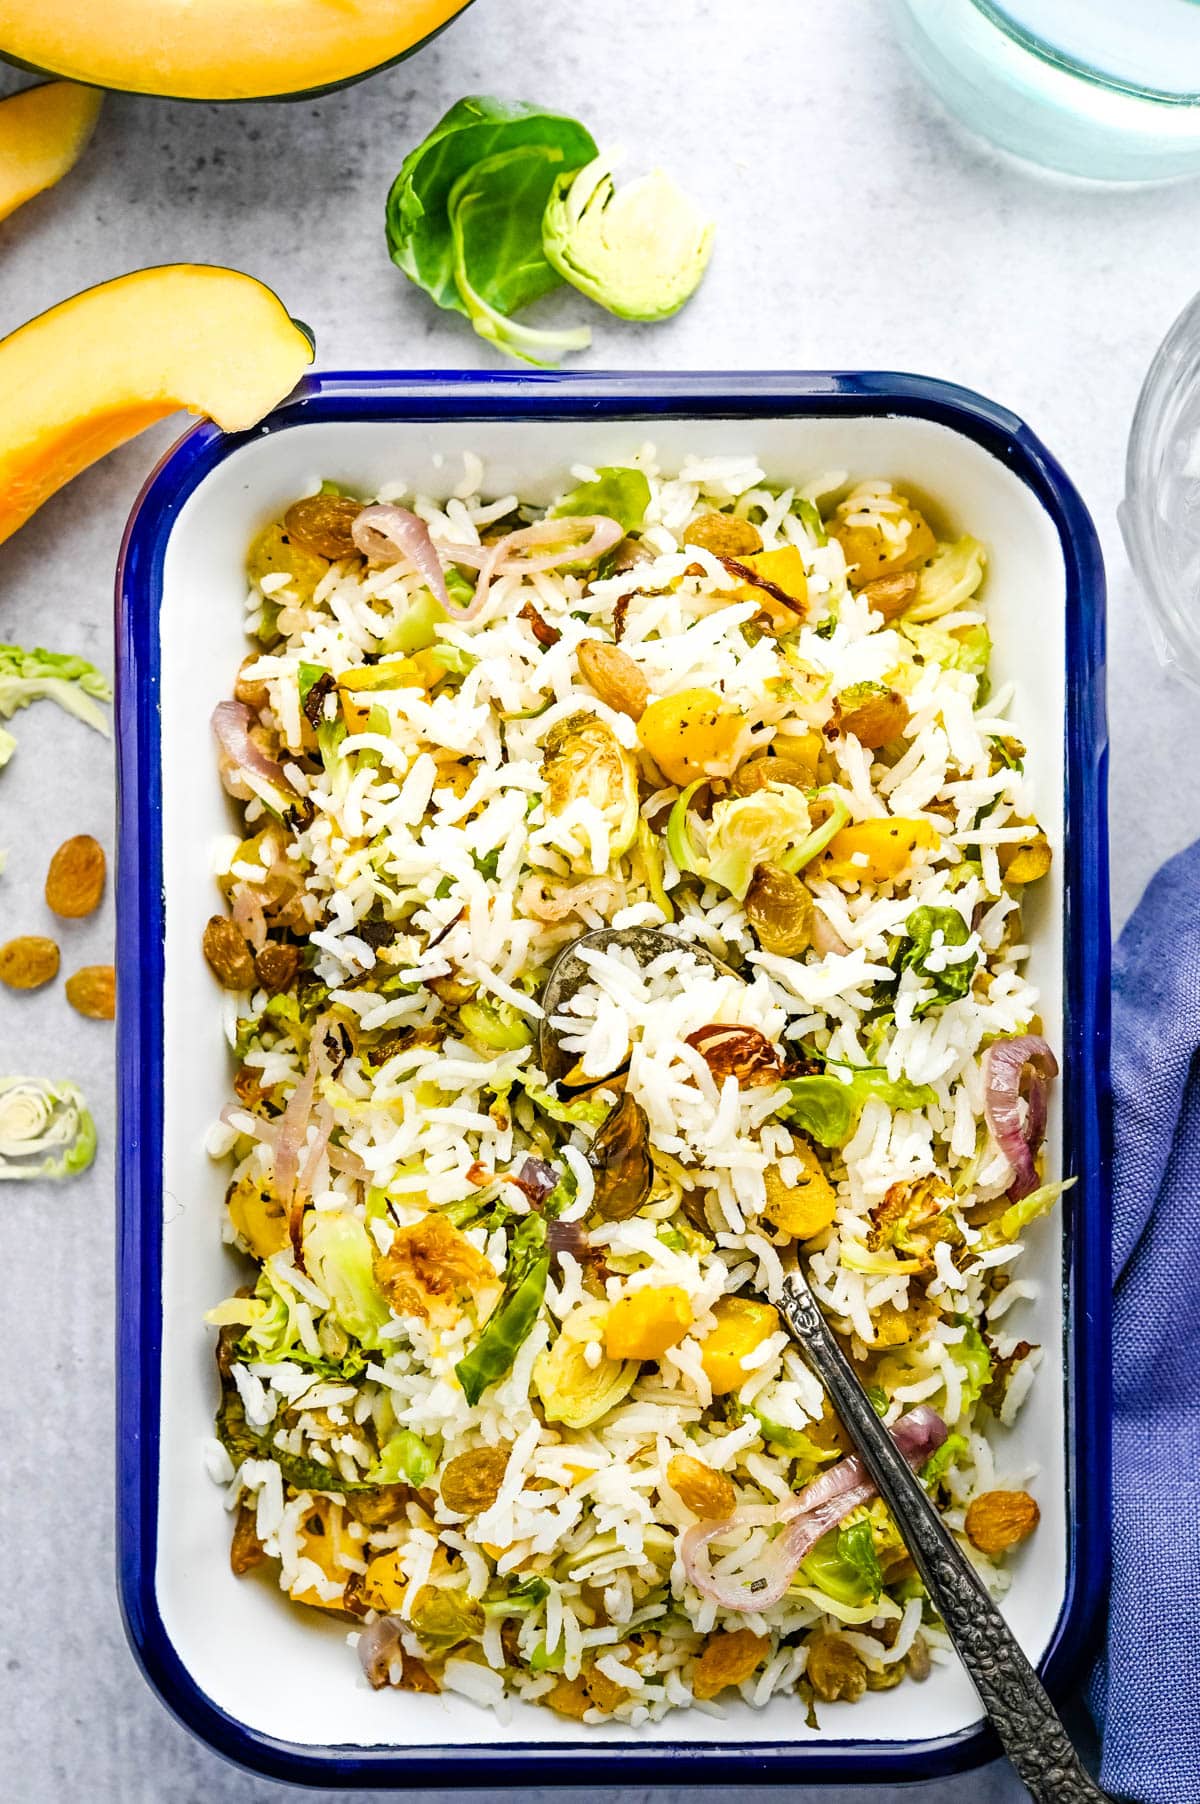 rice pilaf with golden raisins, squash and brussels sprouts.